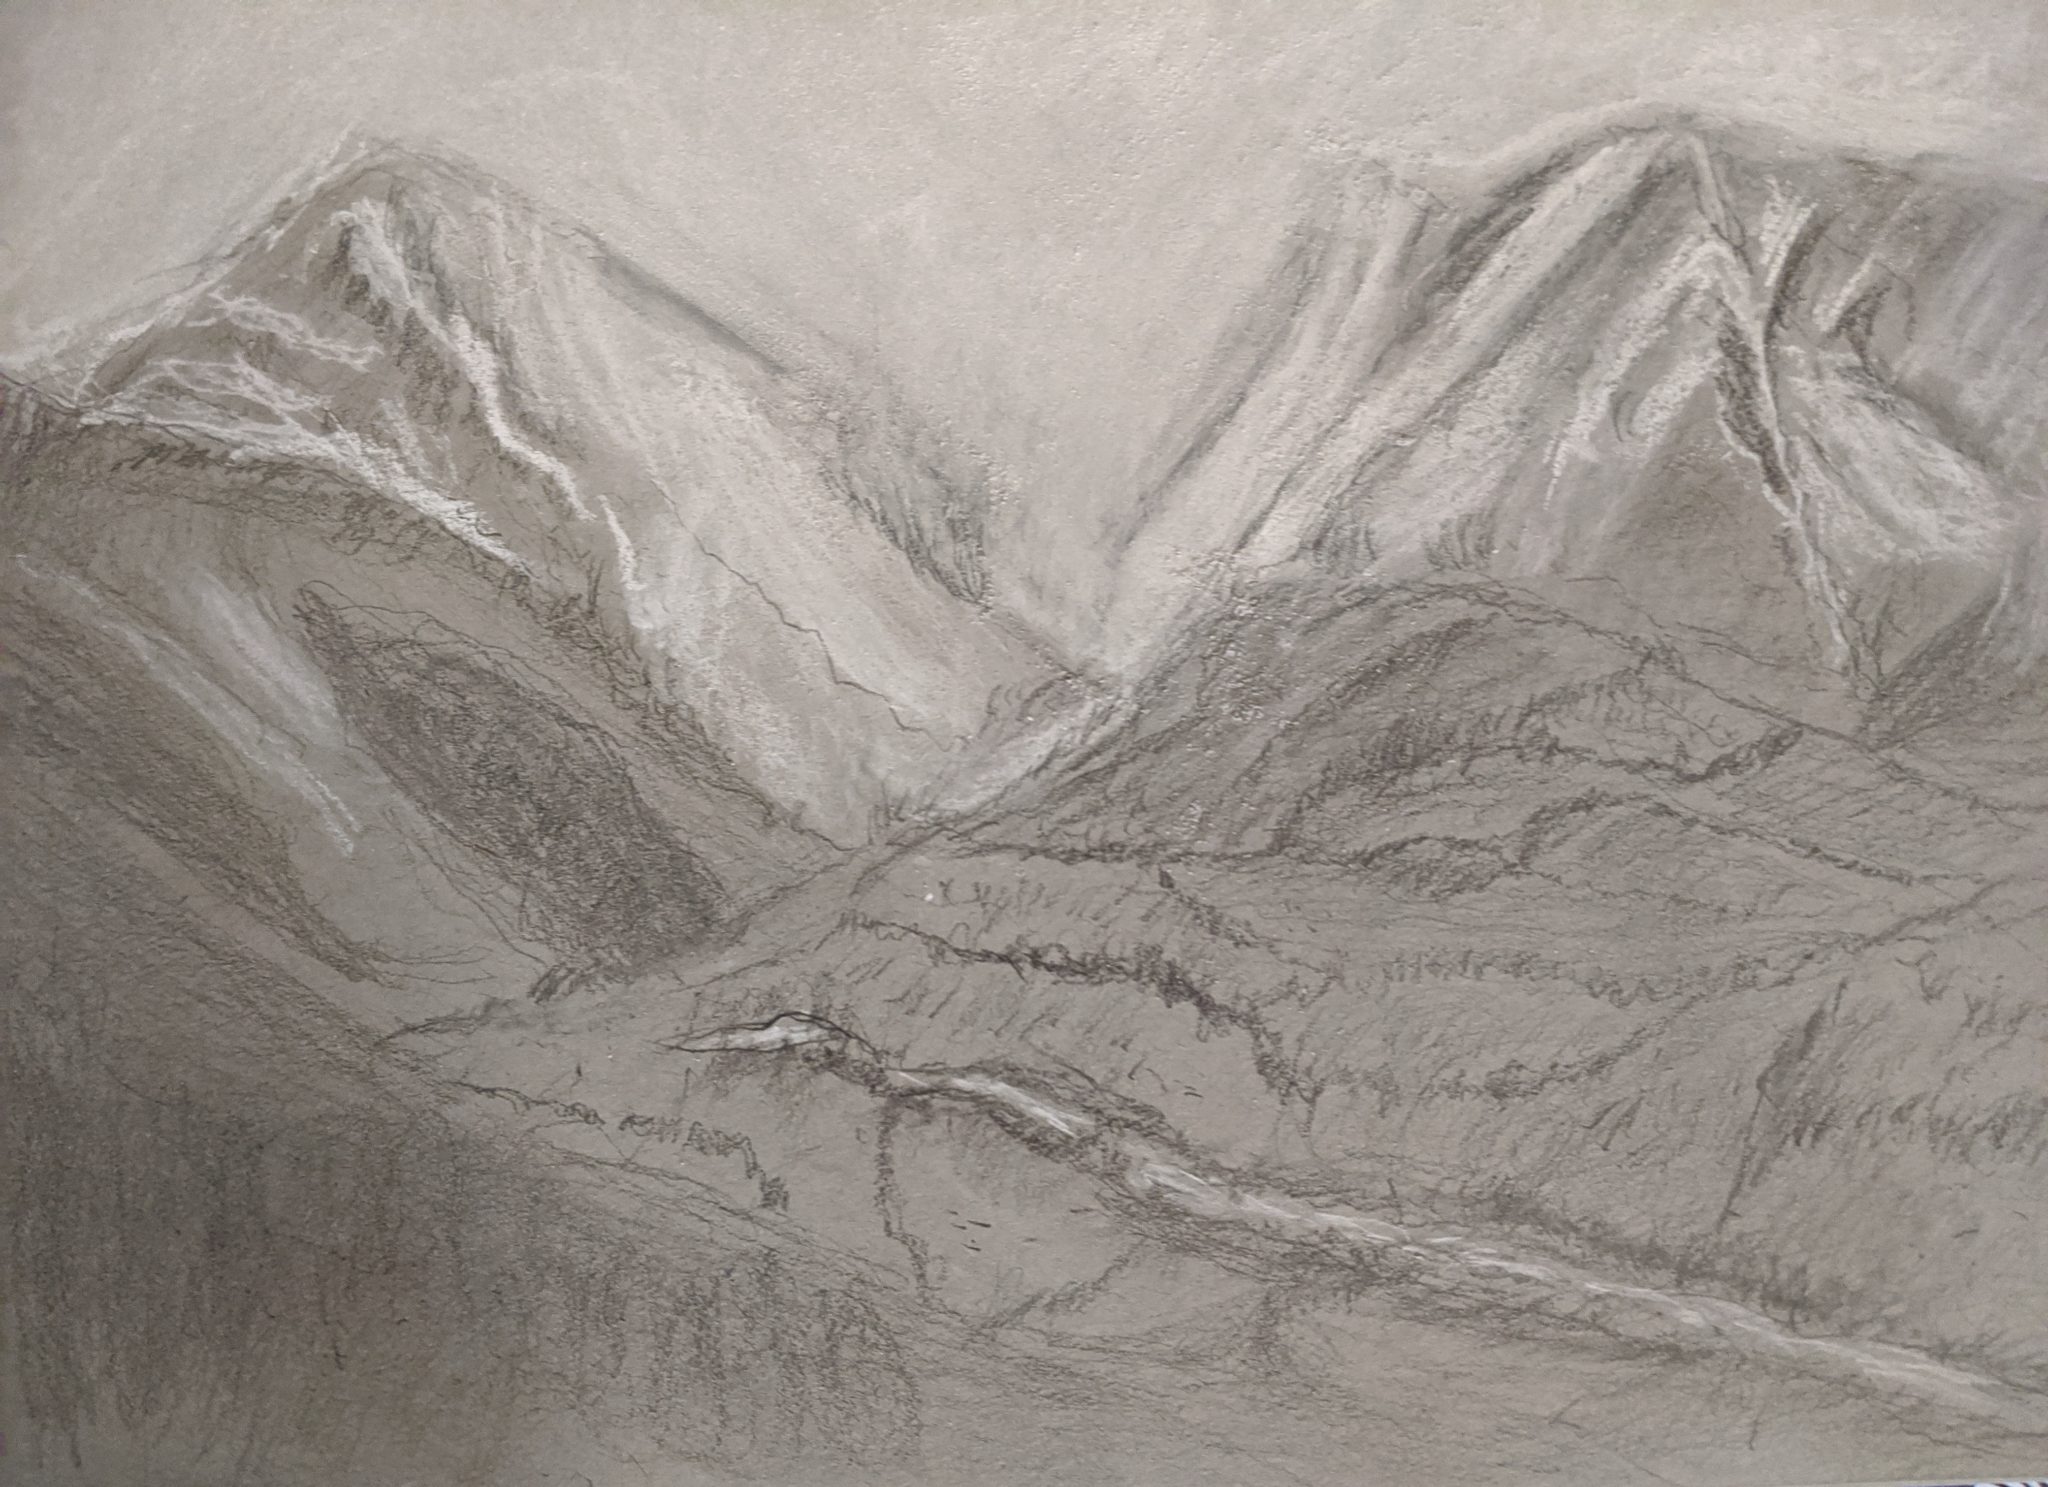 Drawing Together Episode 52: Drawing Mountain Atmosphere | Artists Network